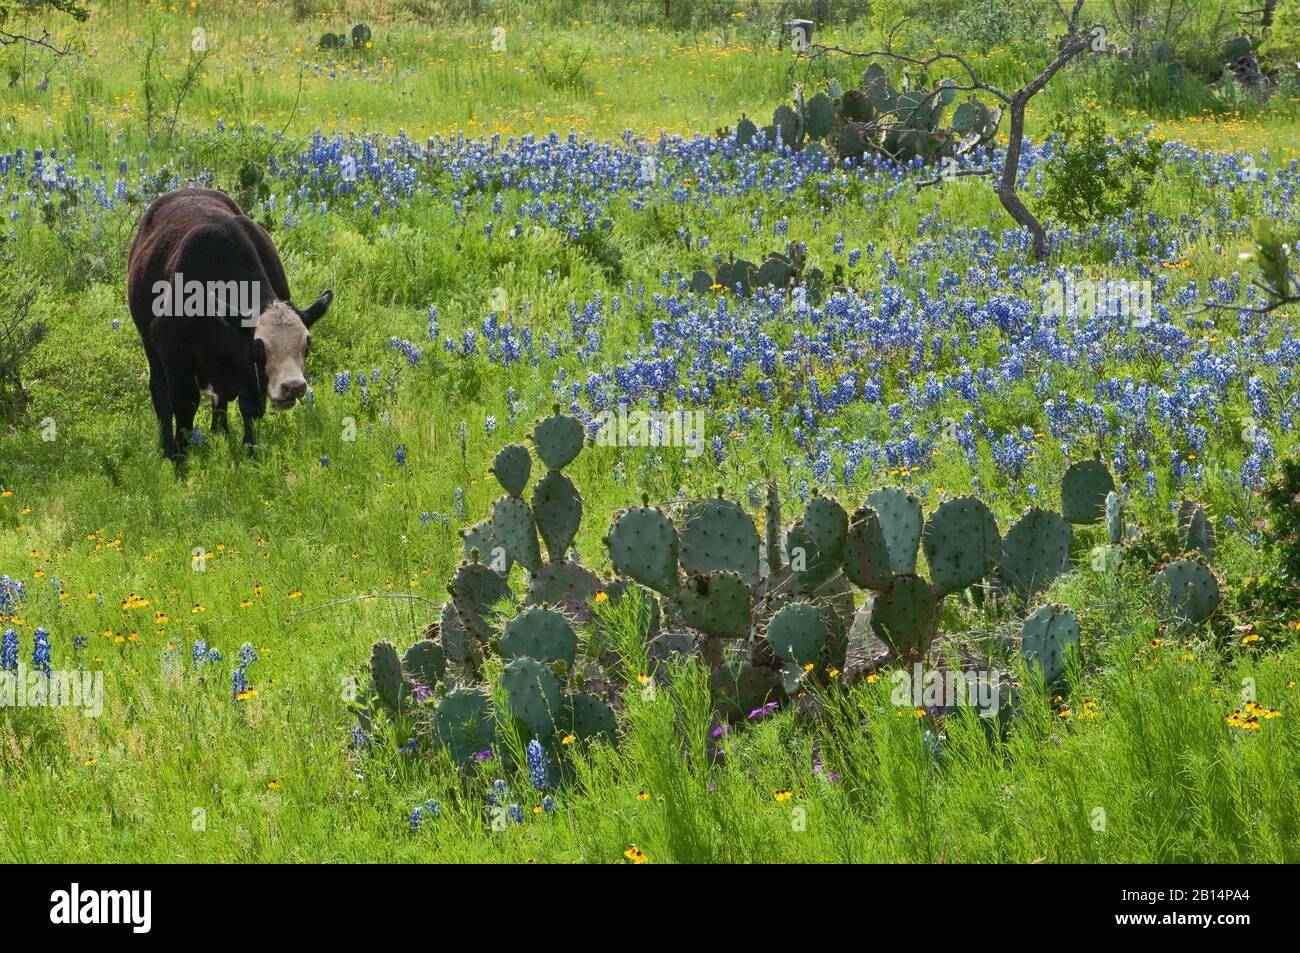 Cattle in field of blooming bluebonnets, prickly pear cactus, Willow City Loop in Hill Country near Fredericksburg, Texas, USA Stock Photo